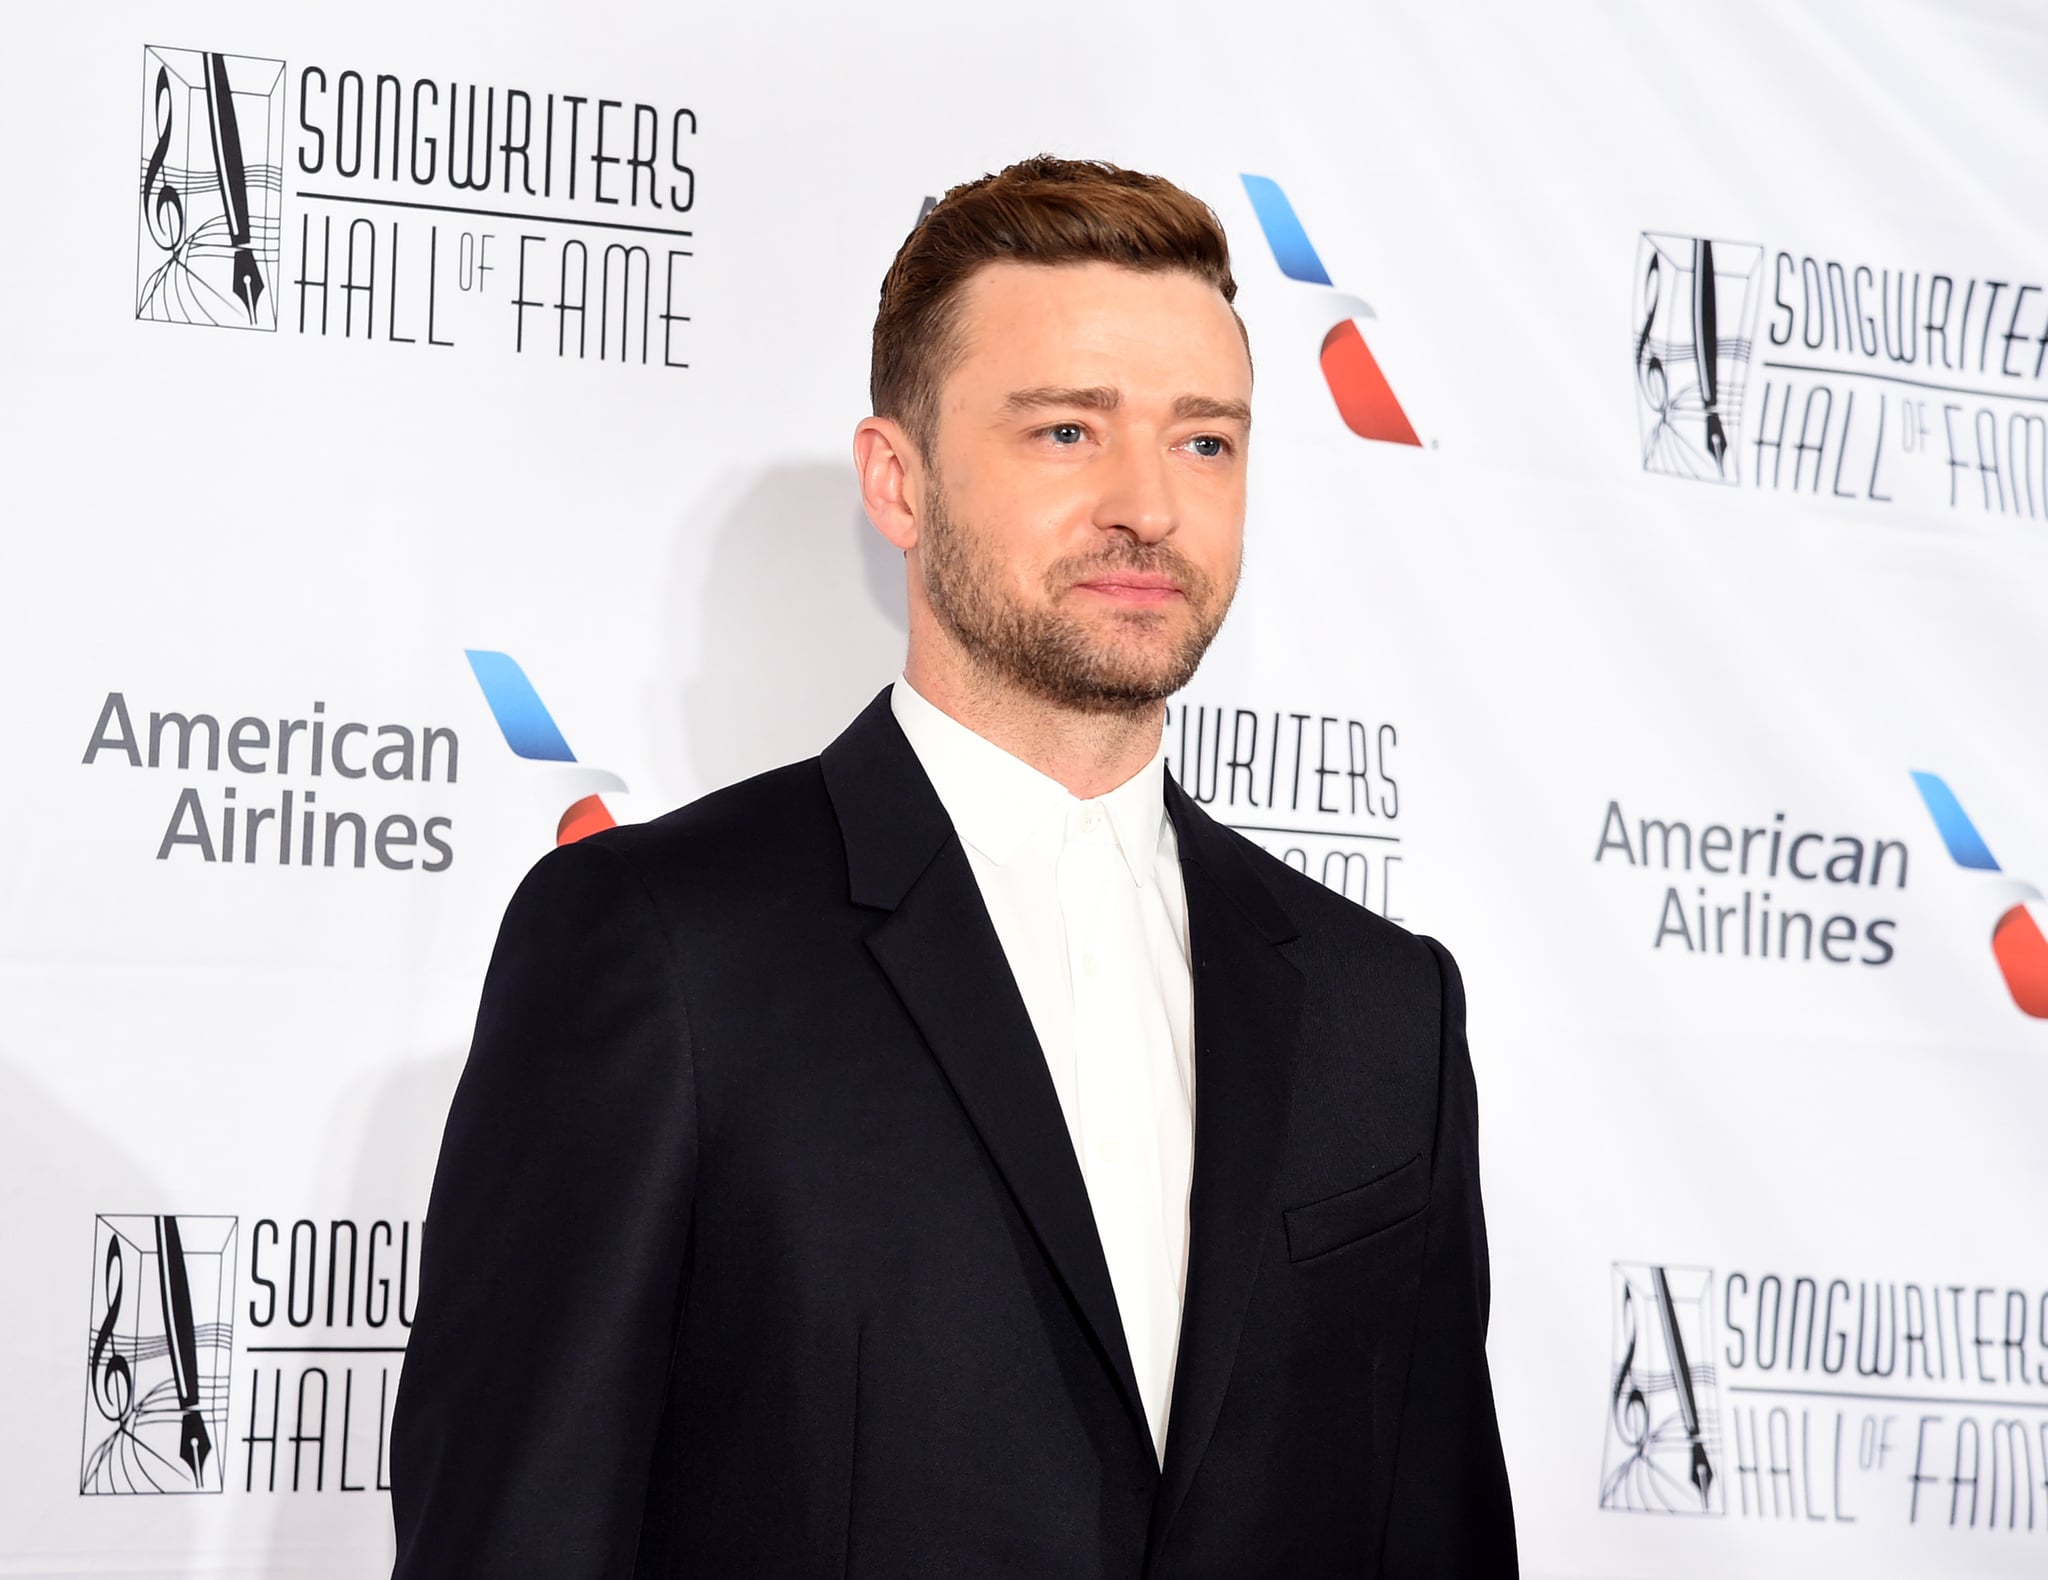 NEW YORK, NEW YORK - JUNE 13: Justin Timberlake attends the 2019 Songwriters Hall Of Fame at The New York Marriott Marquis on June 13, 2019 in New York City. (Photo by Jamie McCarthy/FilmMagic)